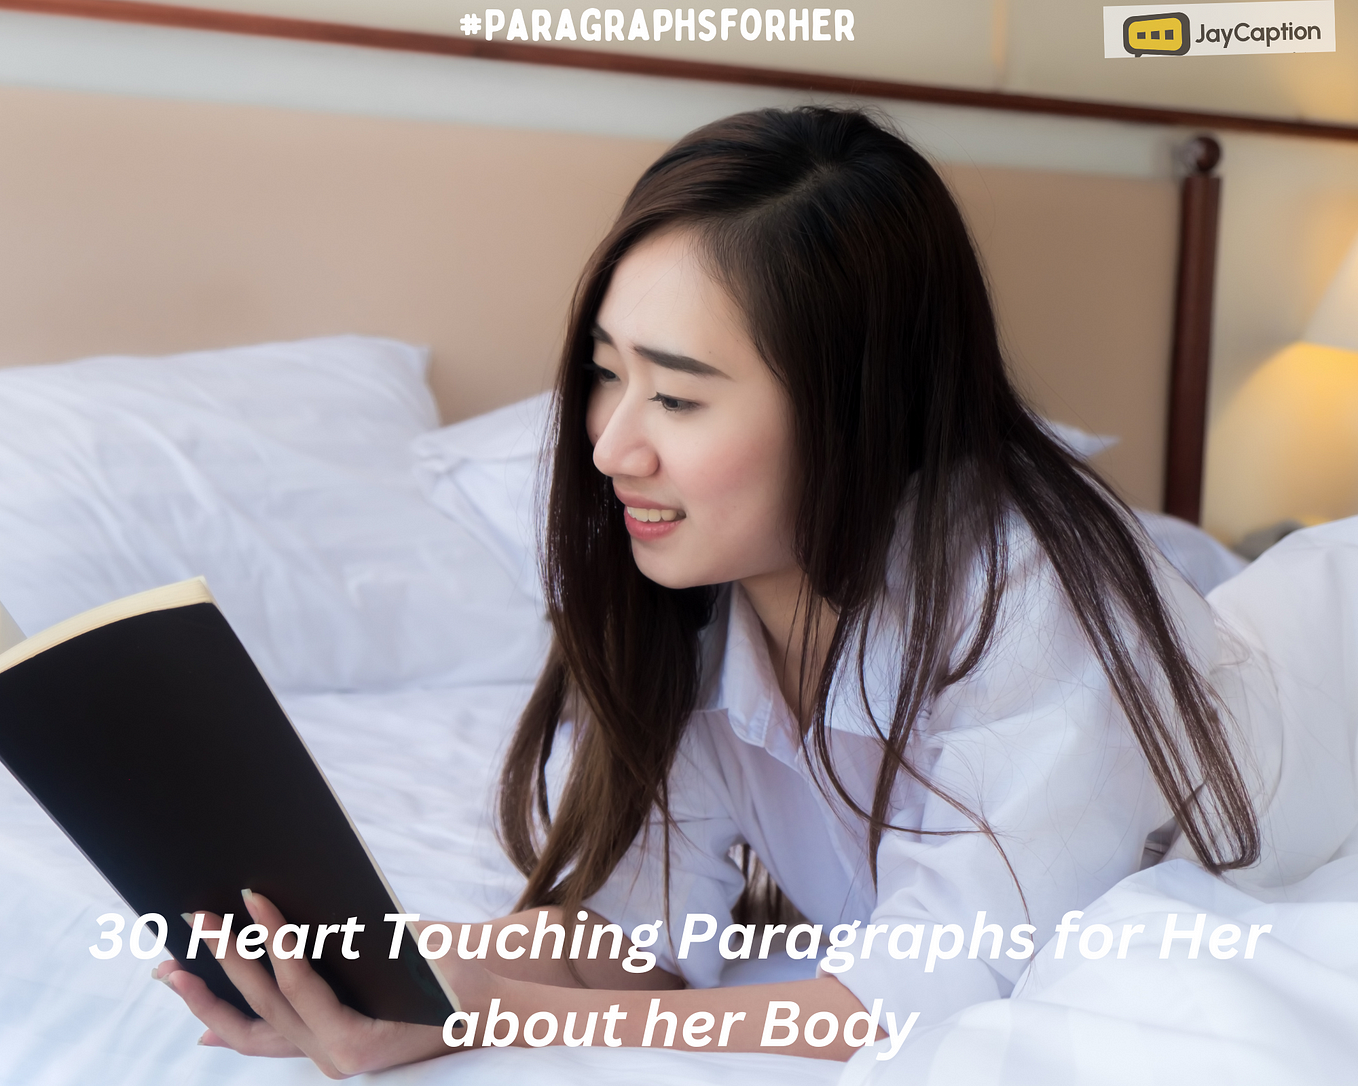 30 Heart Touching Paragraphs for Her about her Body